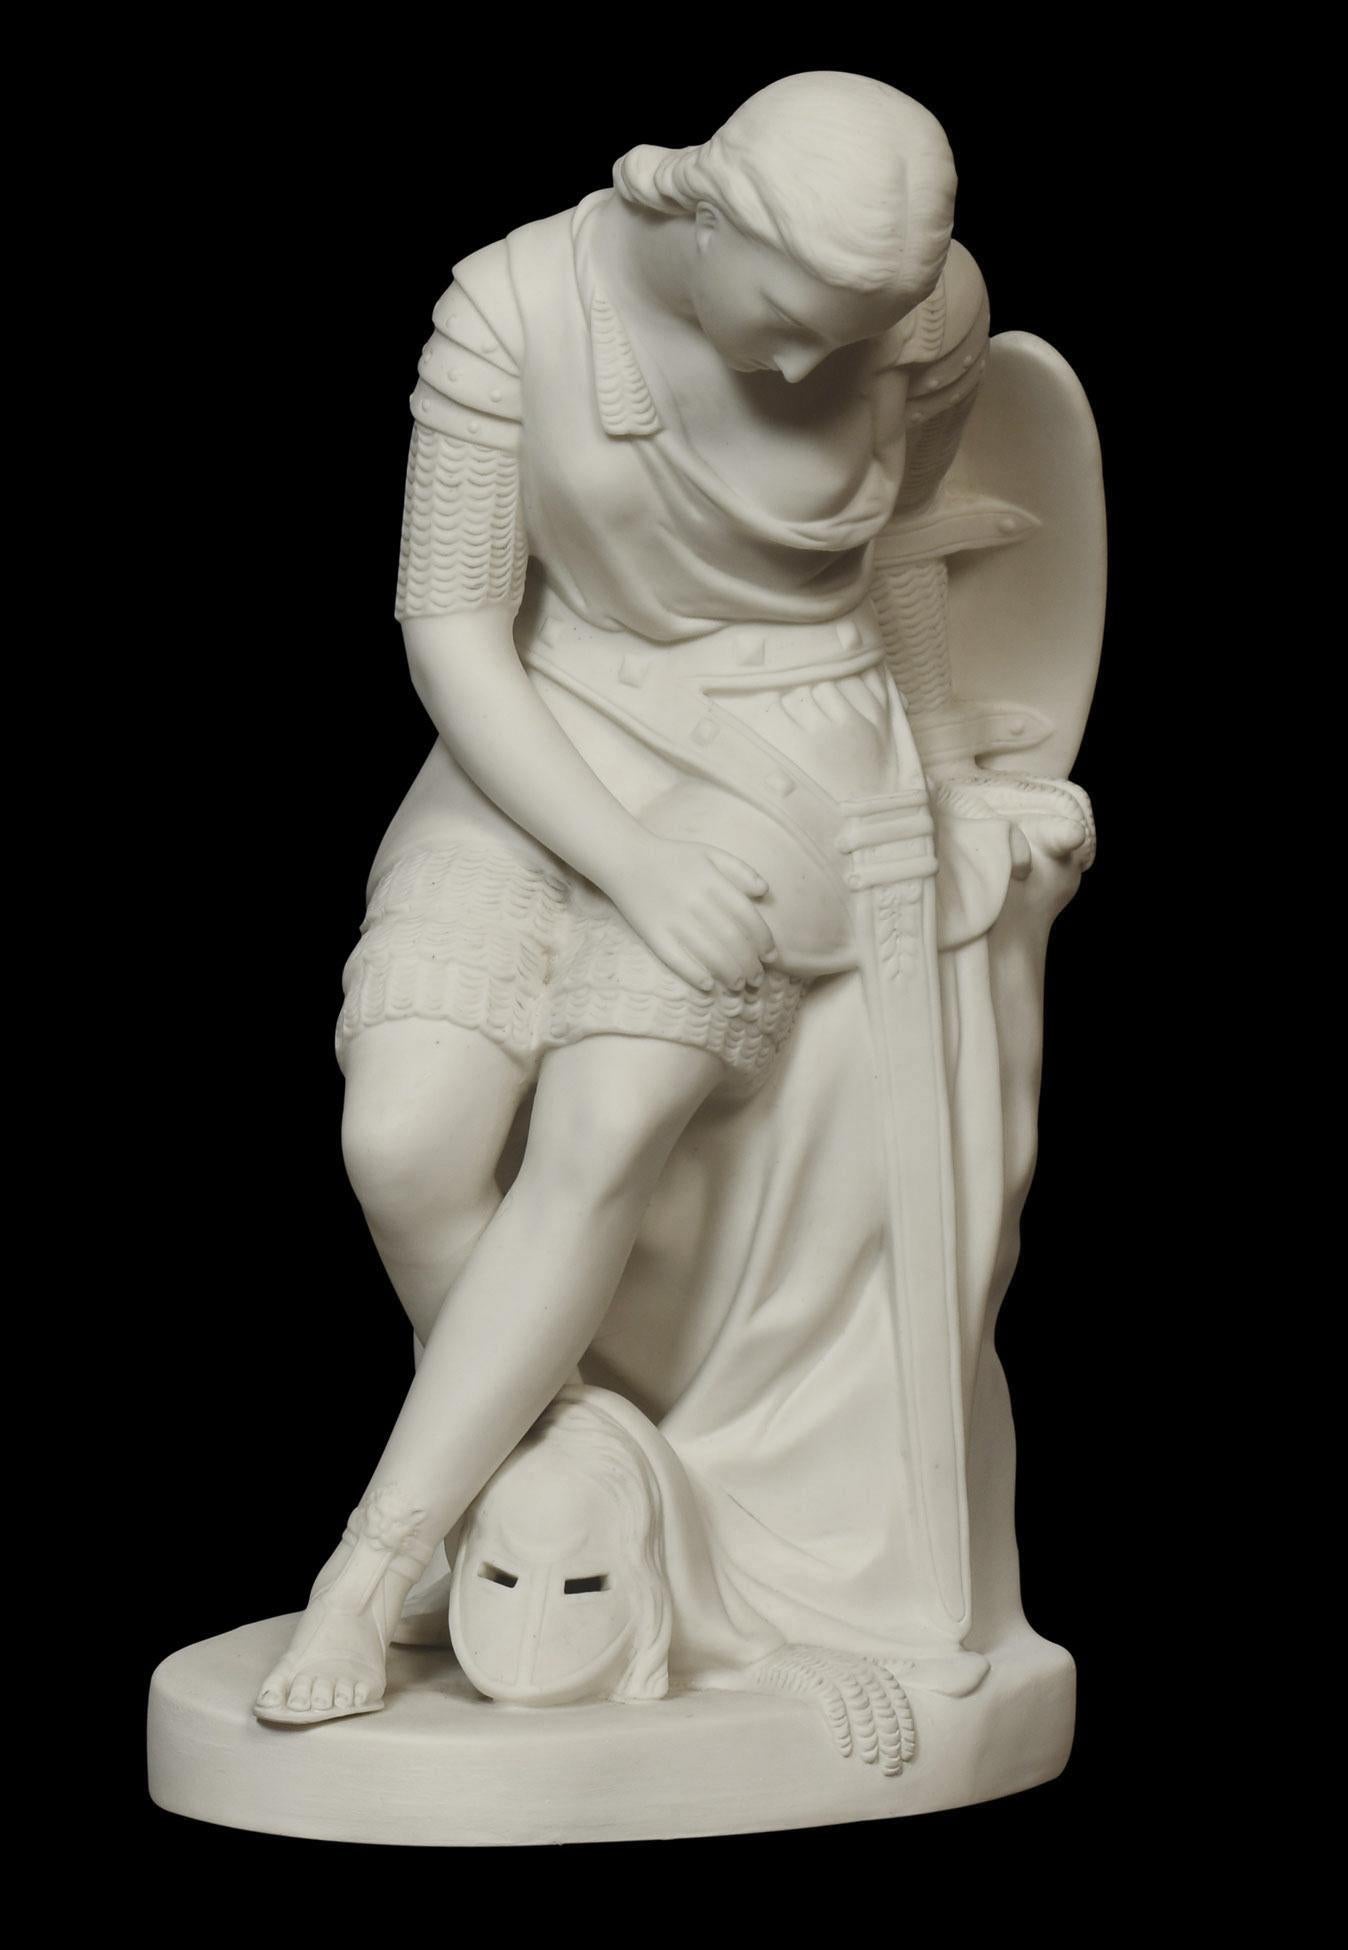 Minton Parian model of clorinda modelled exhausted from the fight, with her armour on, helmet at her feet, signed to the reverse John Bell.
Dimensions:
height 13.5 inches.
width 8.5 inches.
depth 9.5 inches.